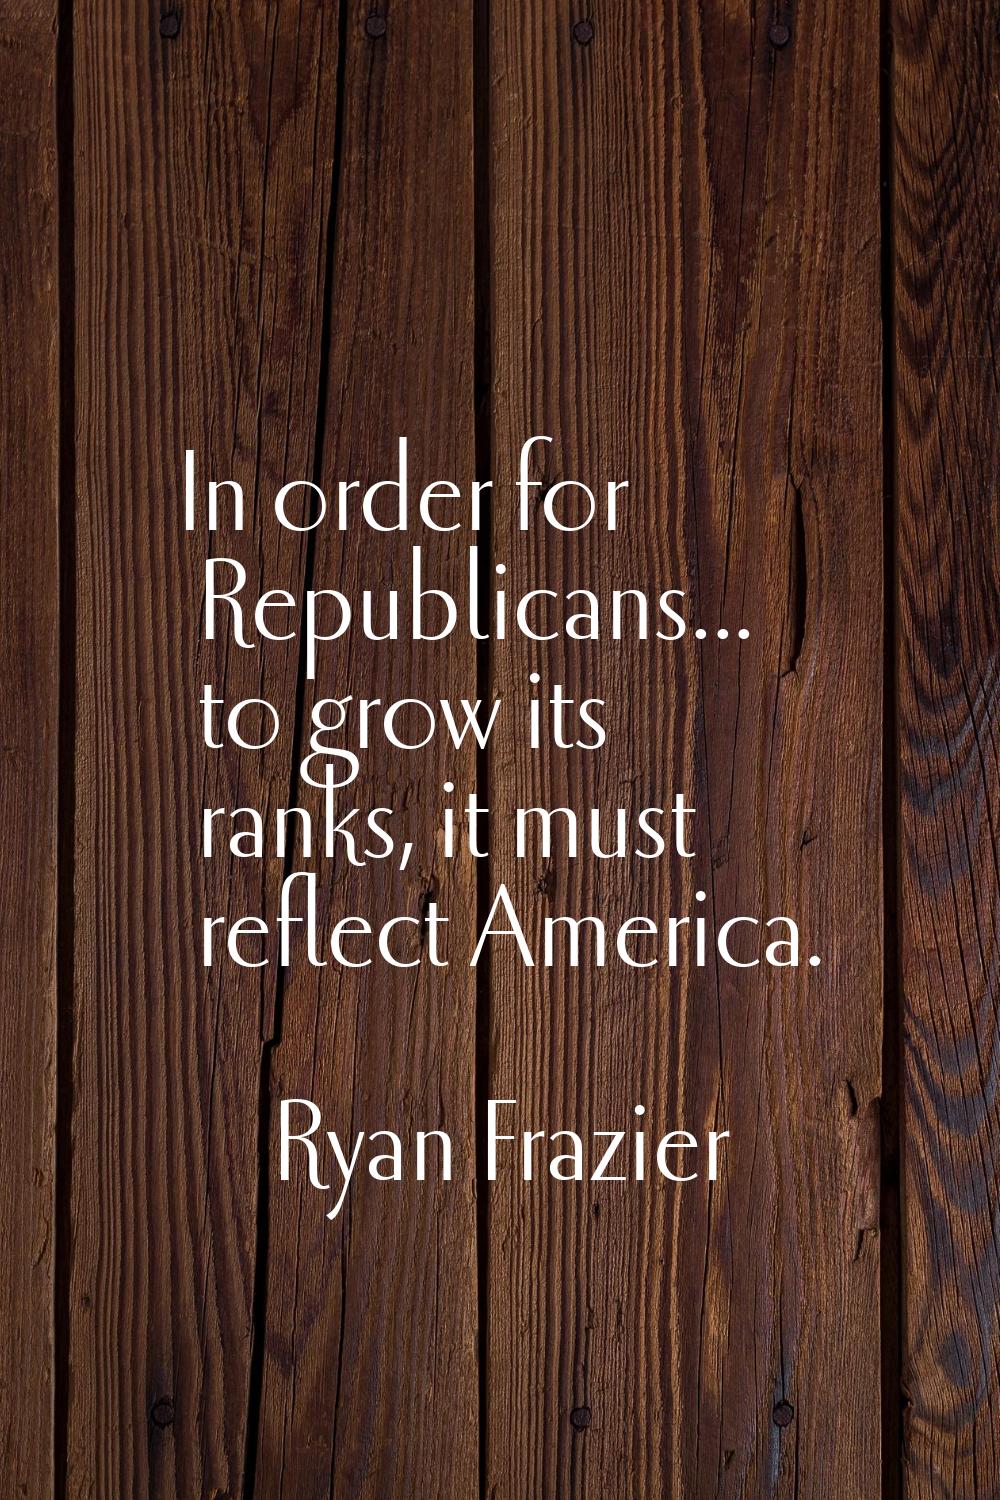 In order for Republicans... to grow its ranks, it must reflect America.